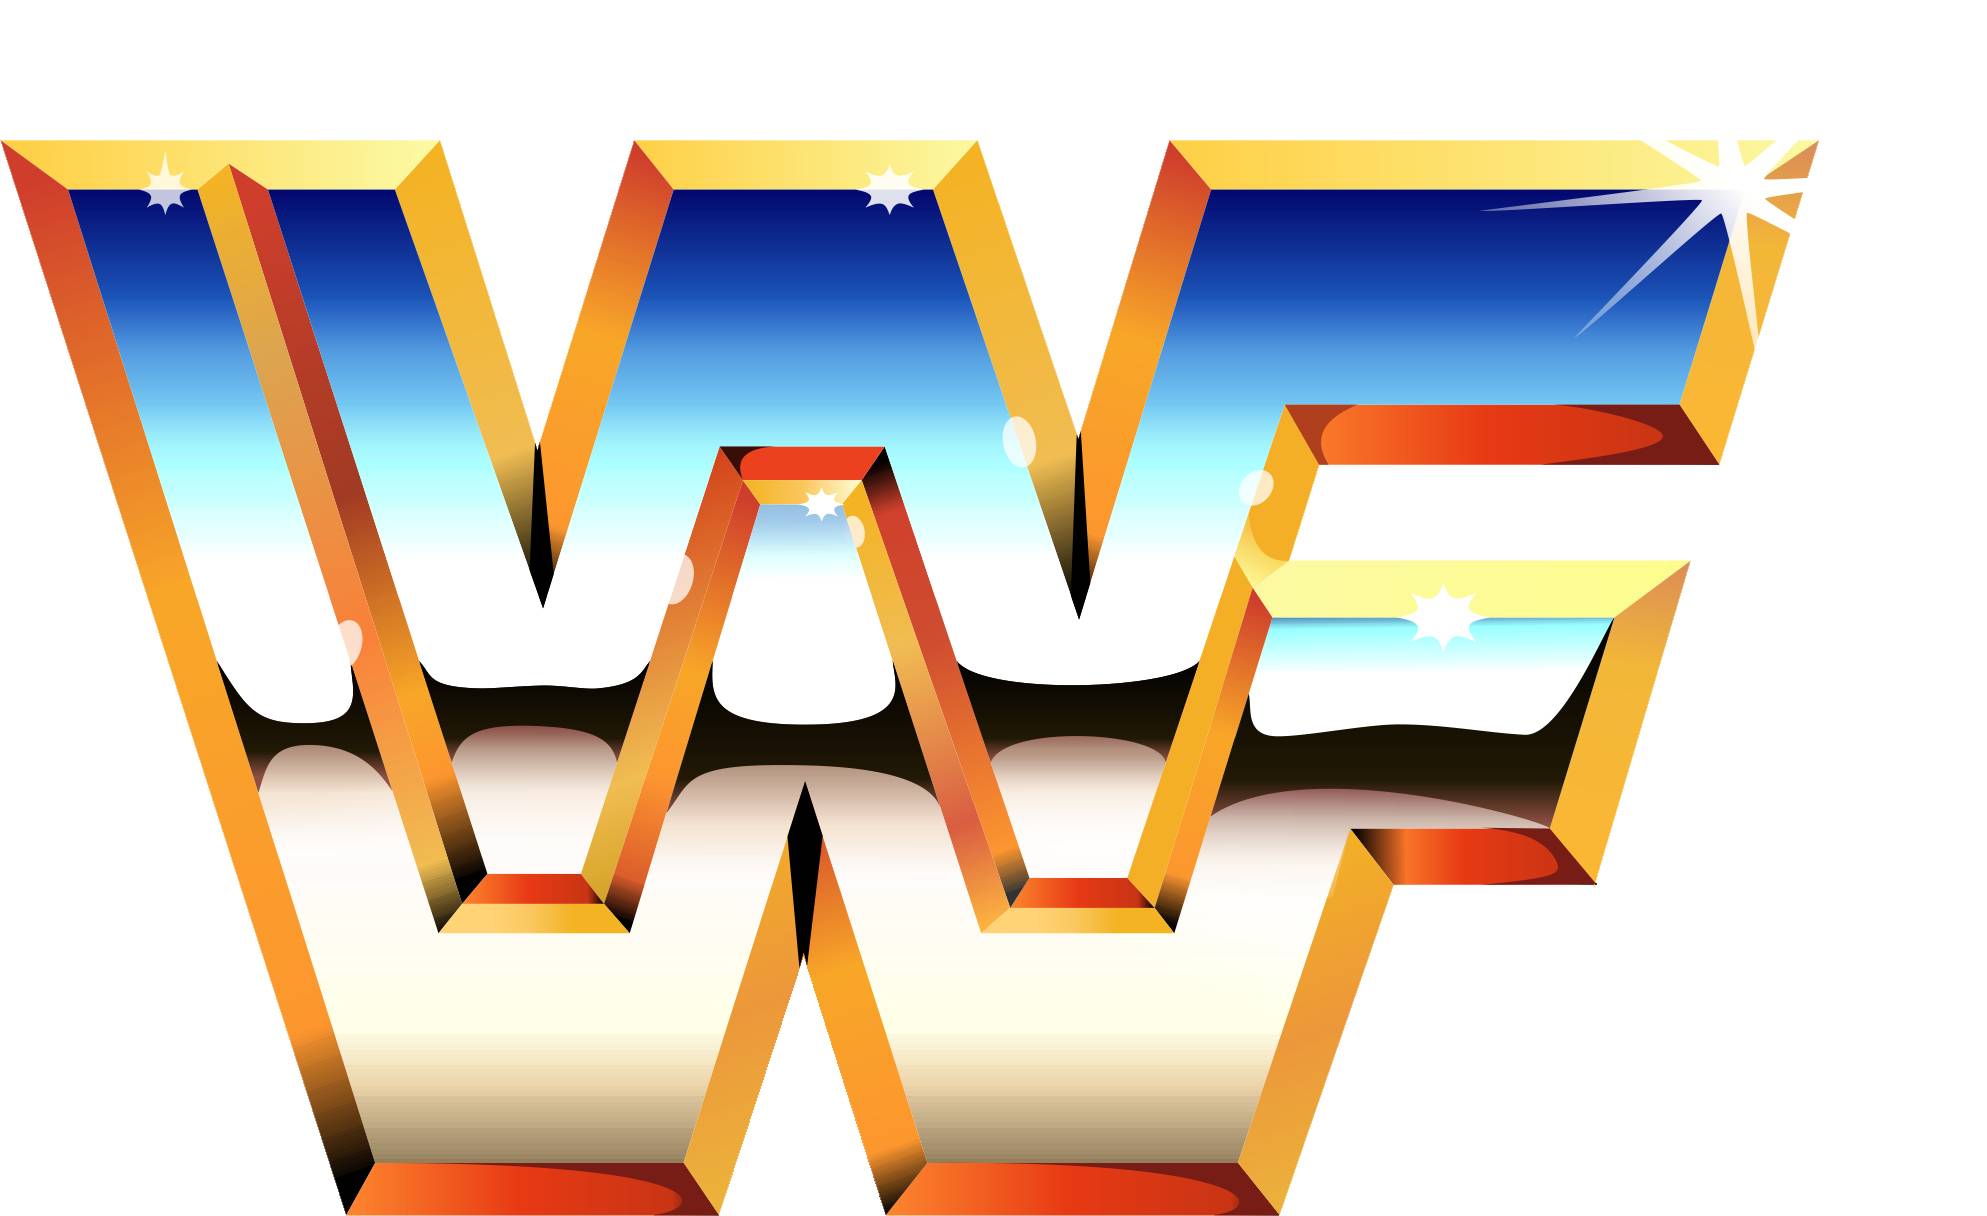 333948 Wwe Wwe Old School Logo.png 1,987×1,216 Pixels | Wrestling Promotion Logos | Pinterest | Promotion And Logos - Wwf Vector, Transparent background PNG HD thumbnail